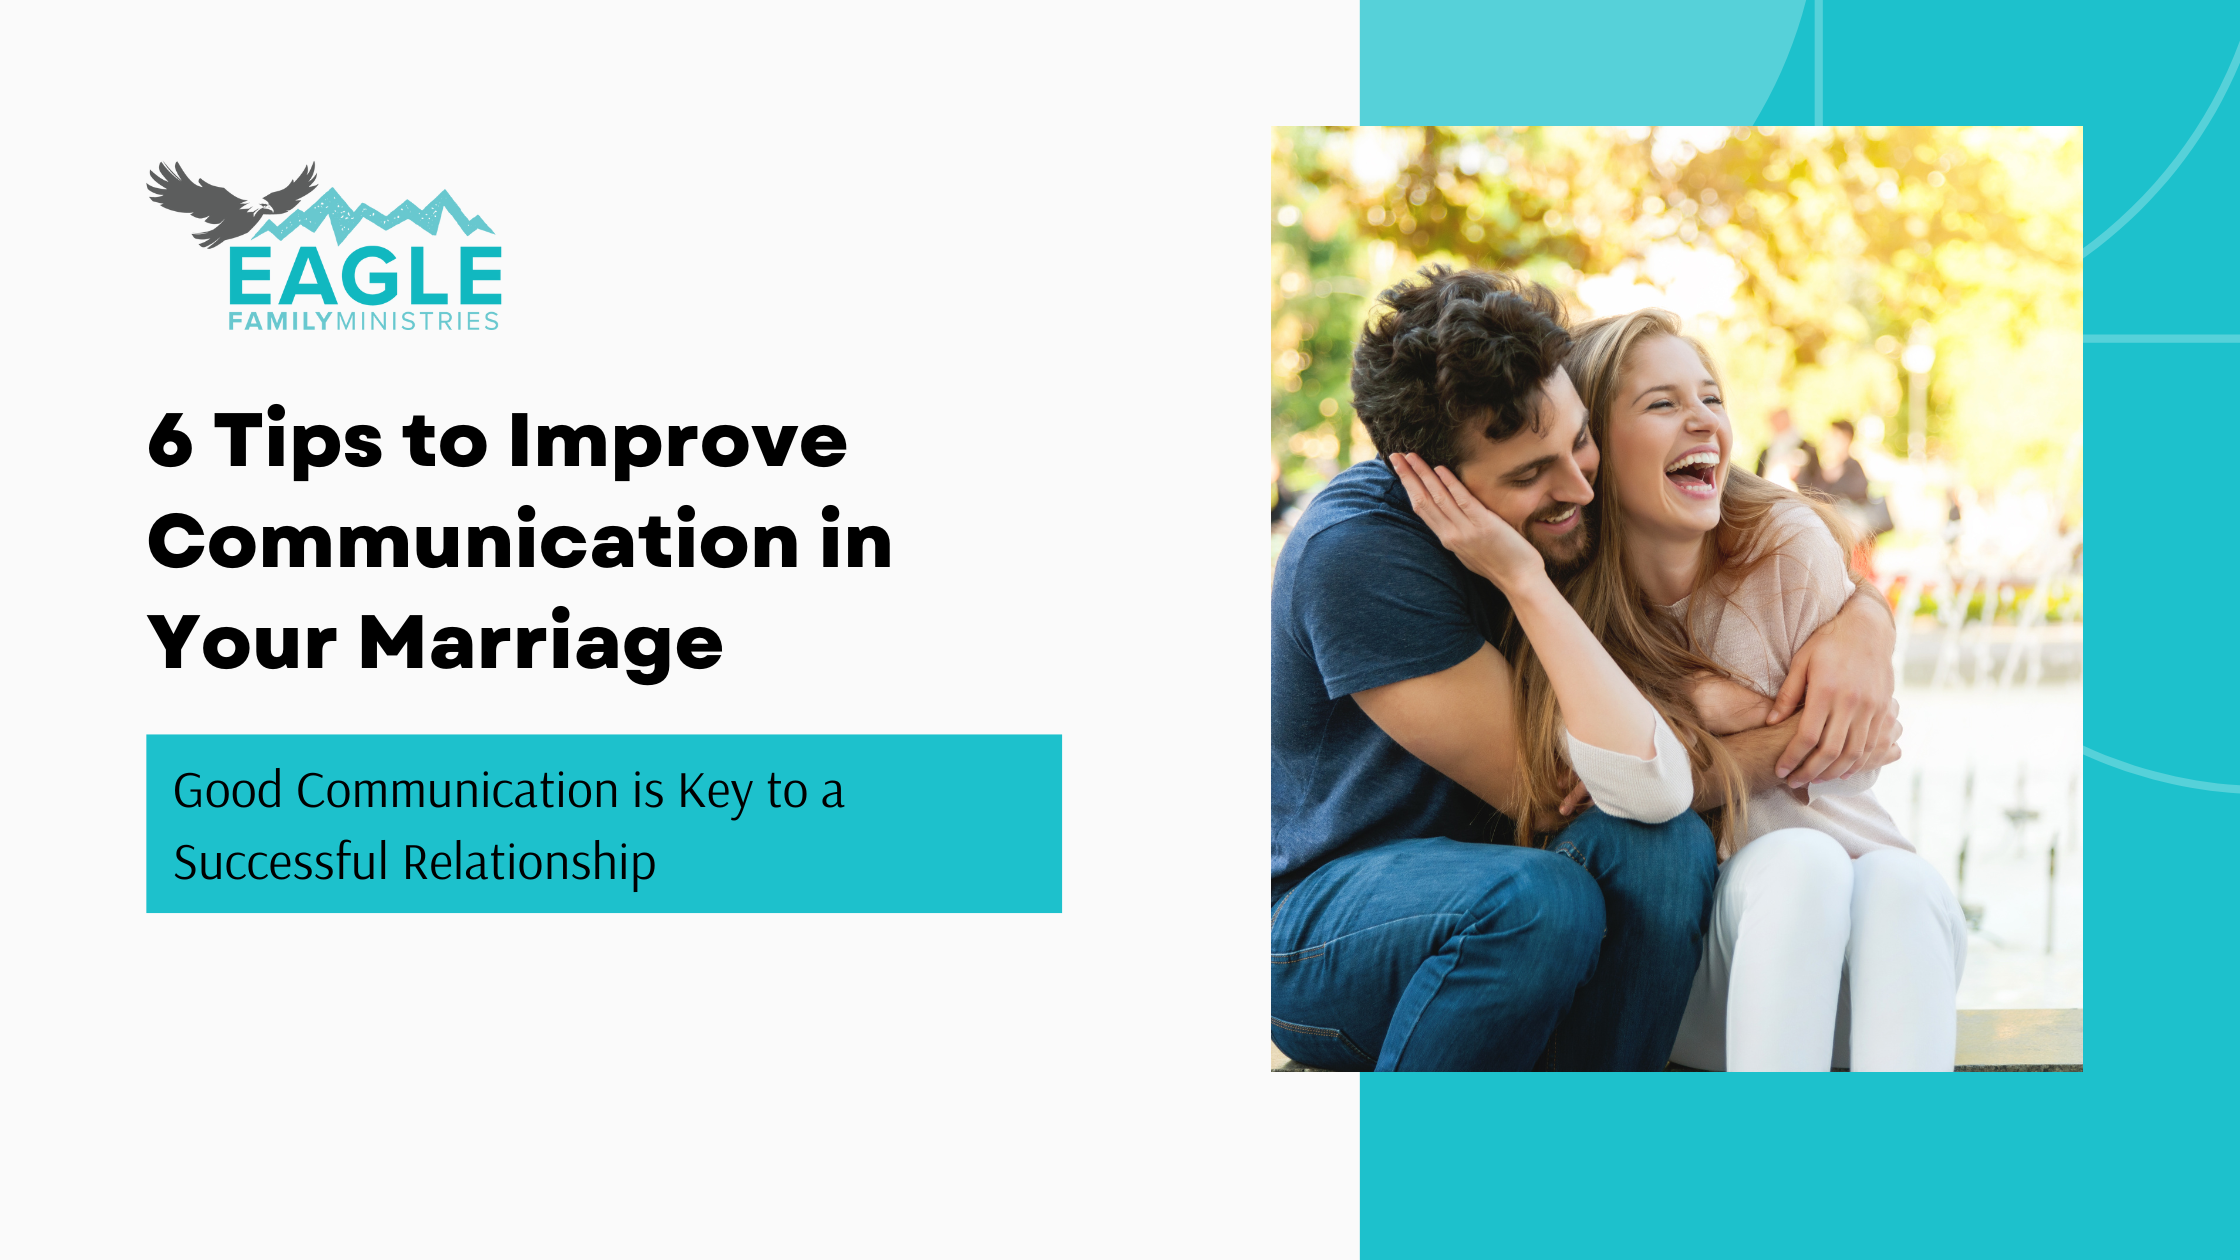 6 Tips to Improve Communication in Your Marriage